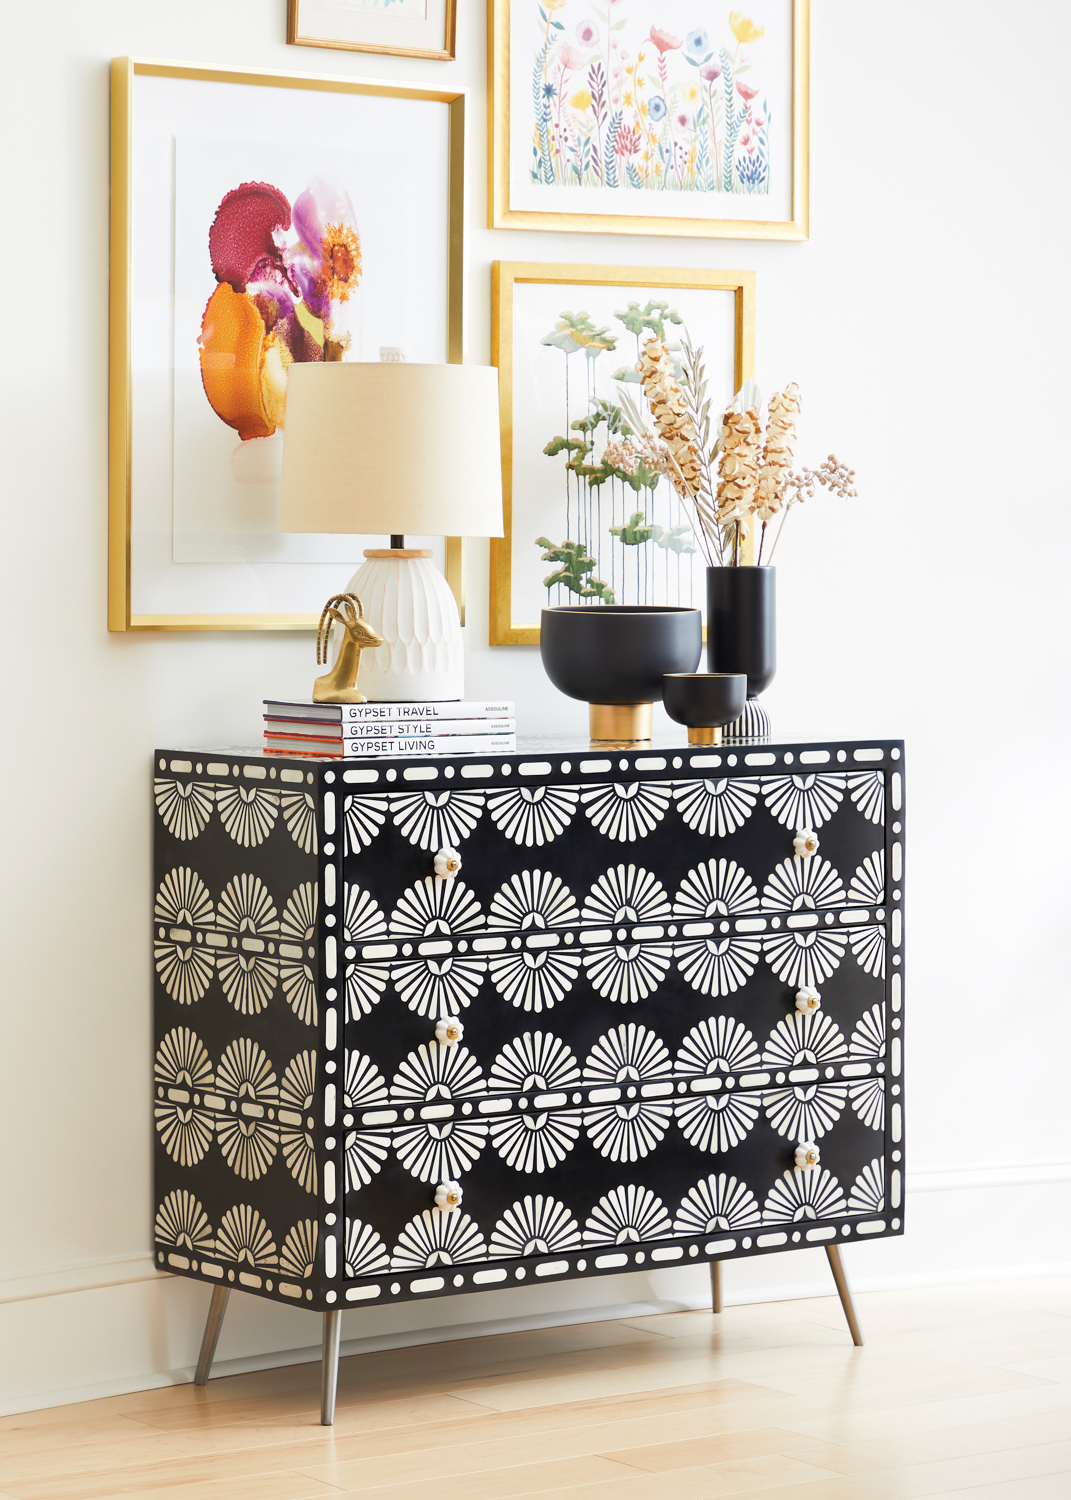 A black and white printed chest with art overhead. RED Winner.